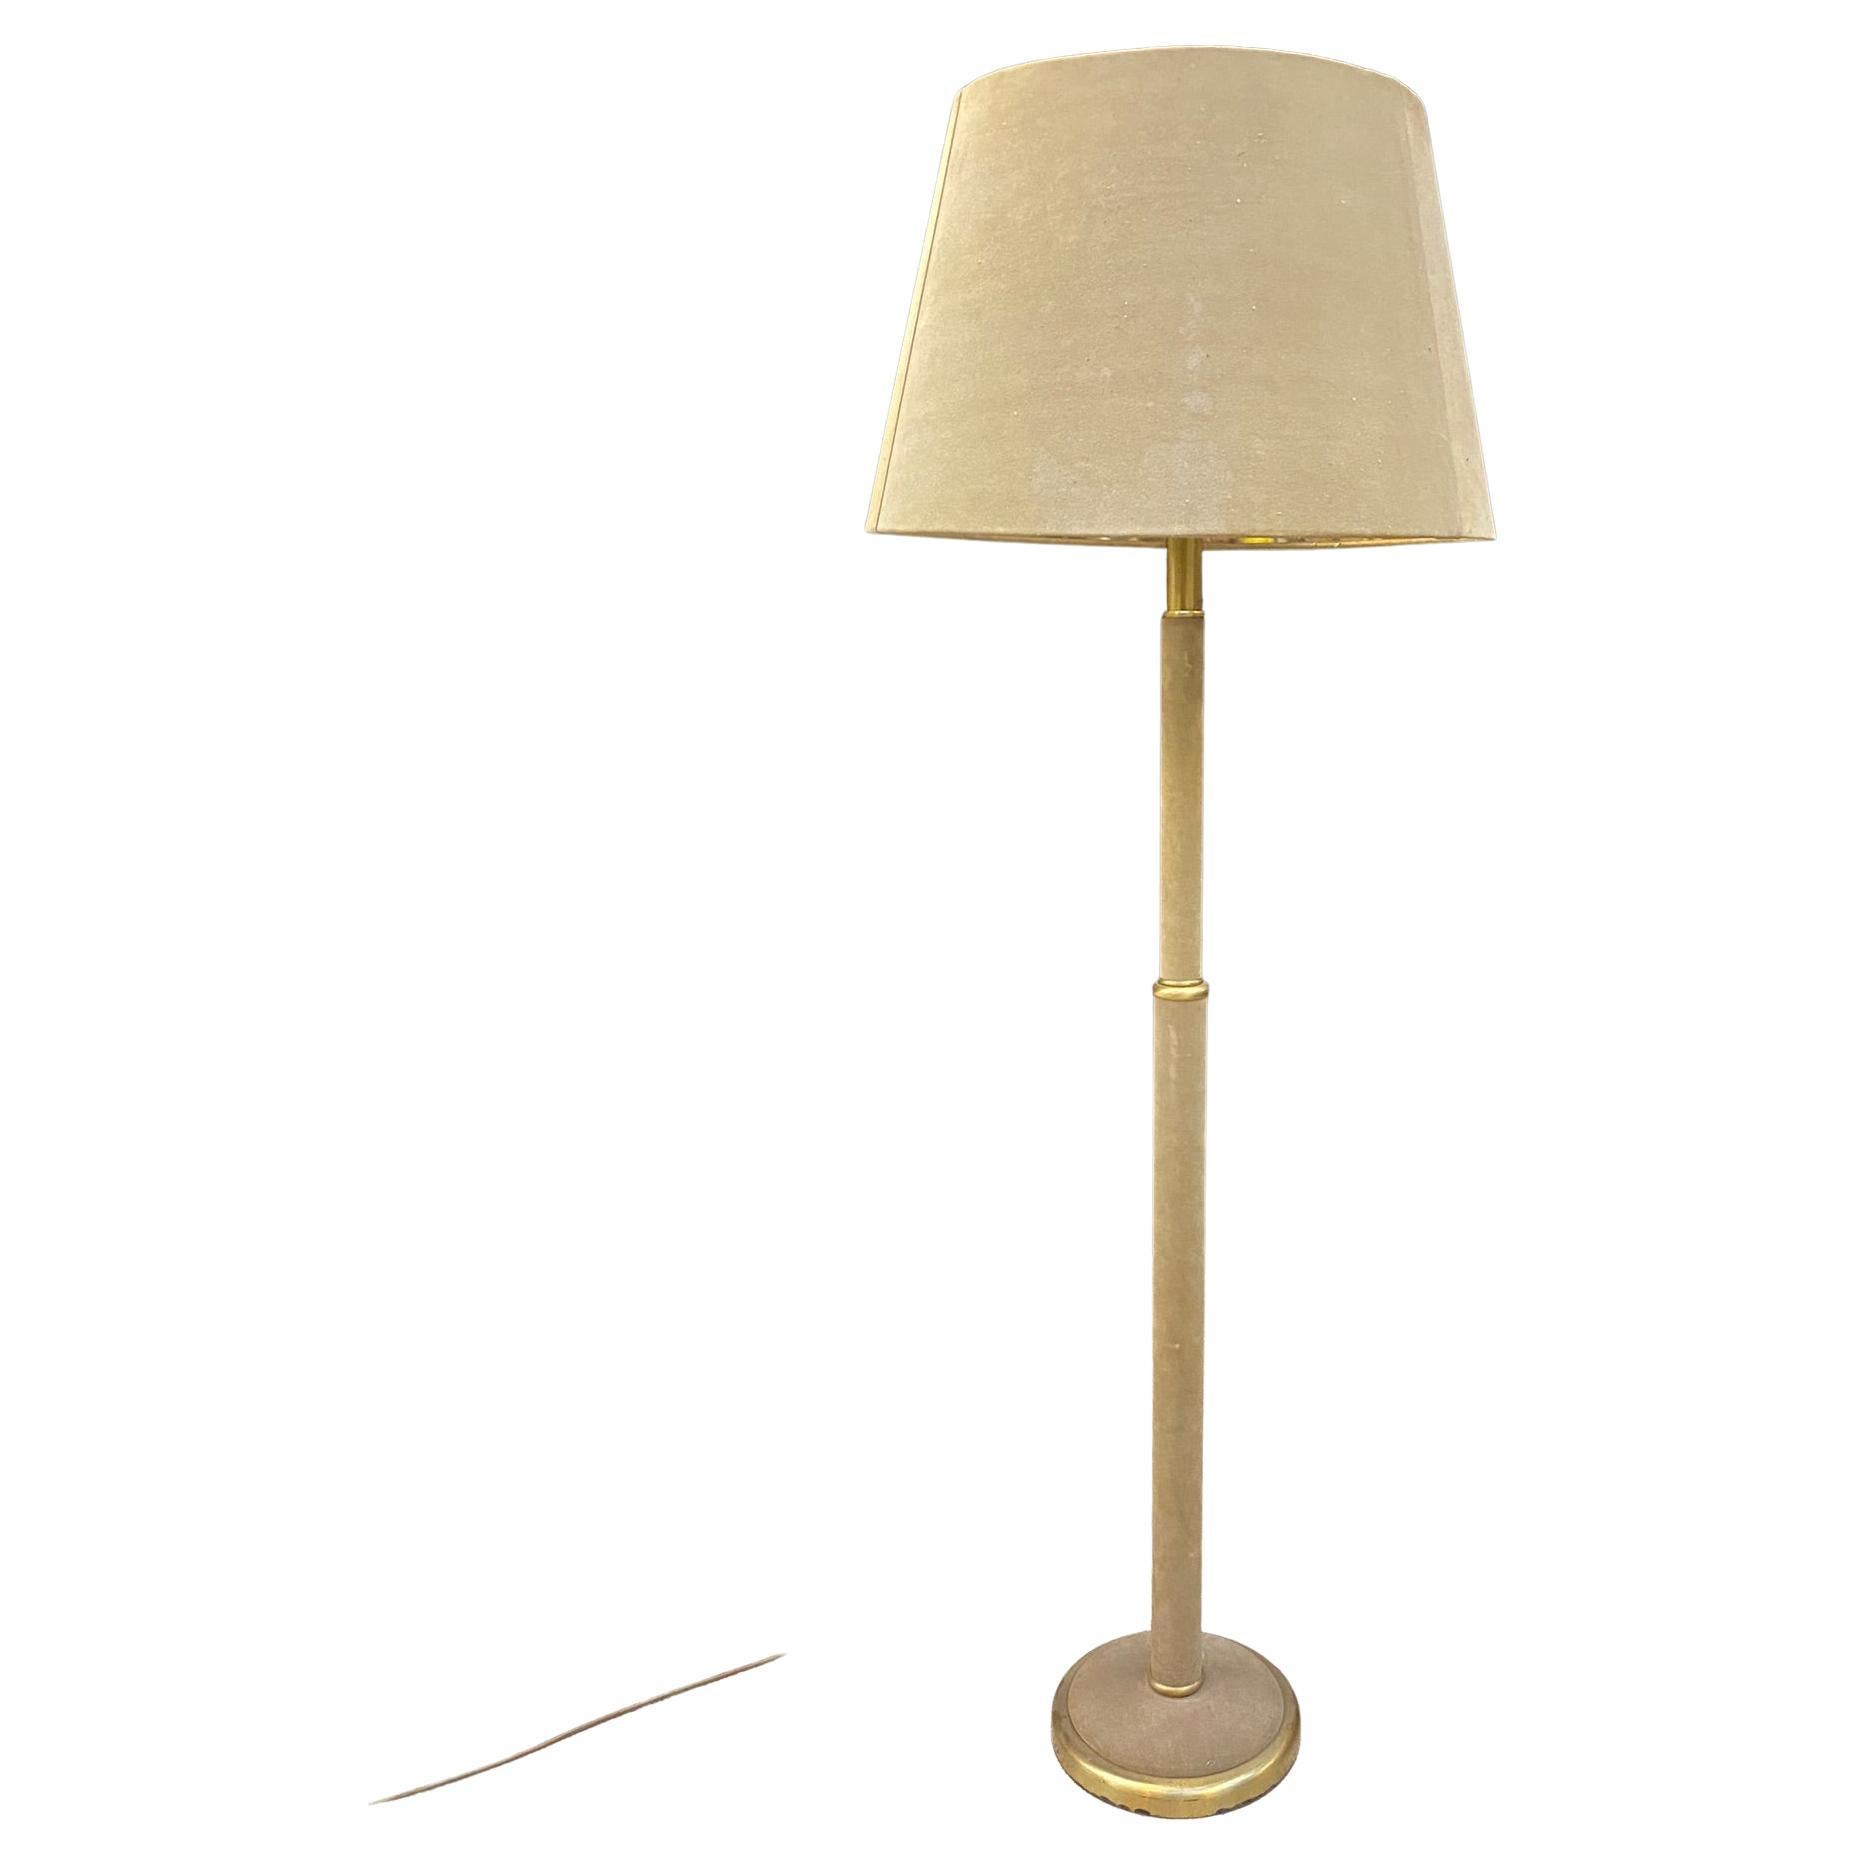 Elegant Floor Lamp in Suede Leather in the Style of Jacques Adnet, circa 1960